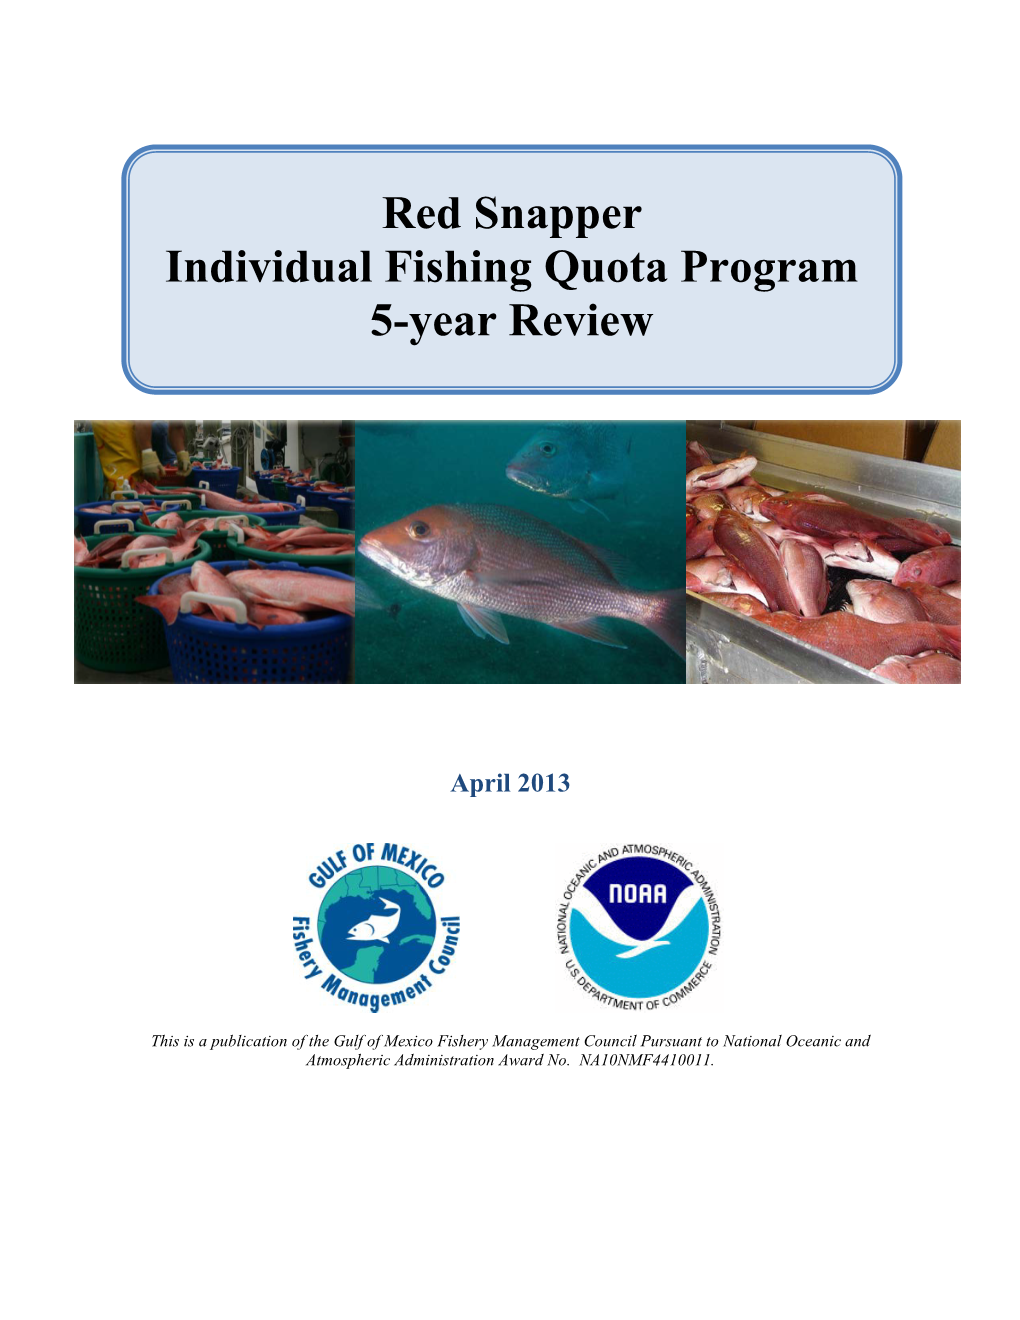 Red Snapper Individual Fishing Quota Program 5-Year Review